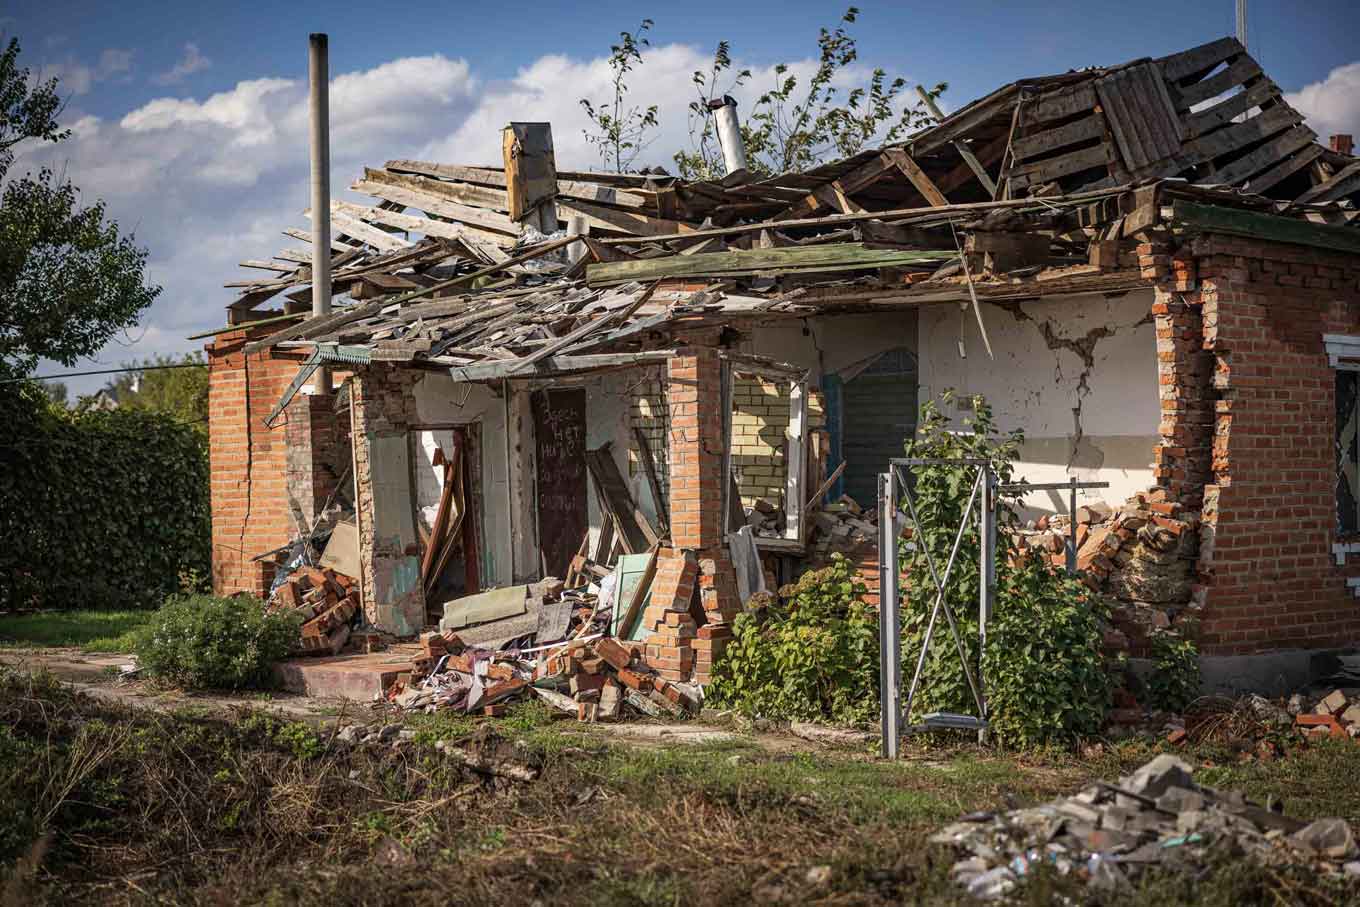 A destroyed single family brick home in Ukraine